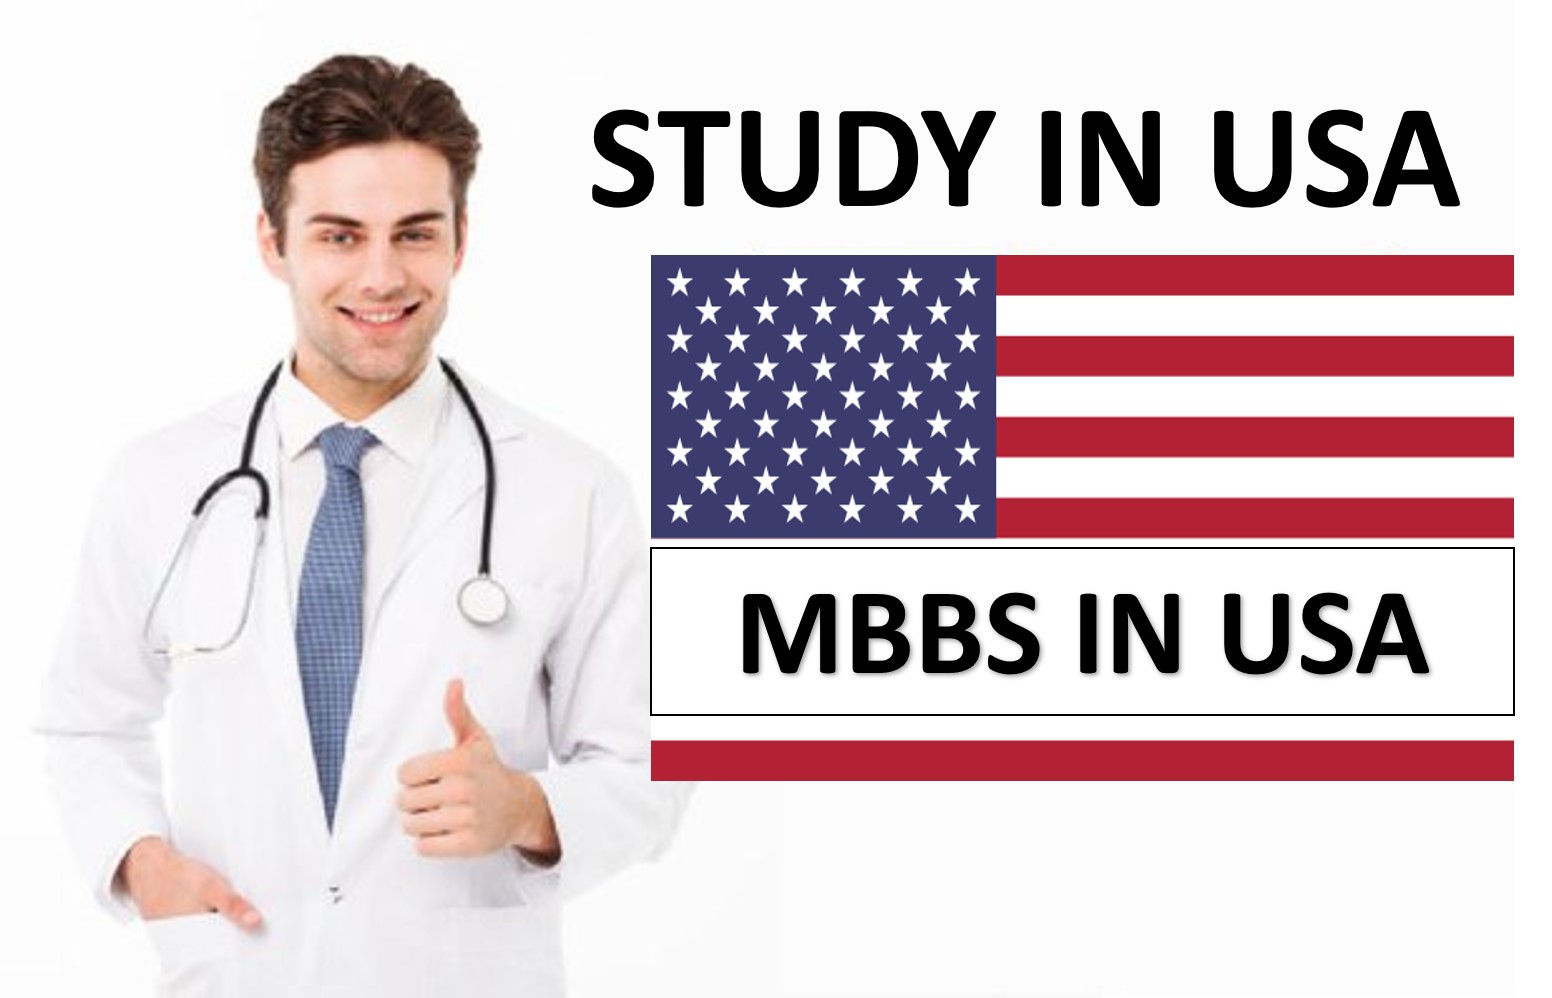 The MBBS in USA